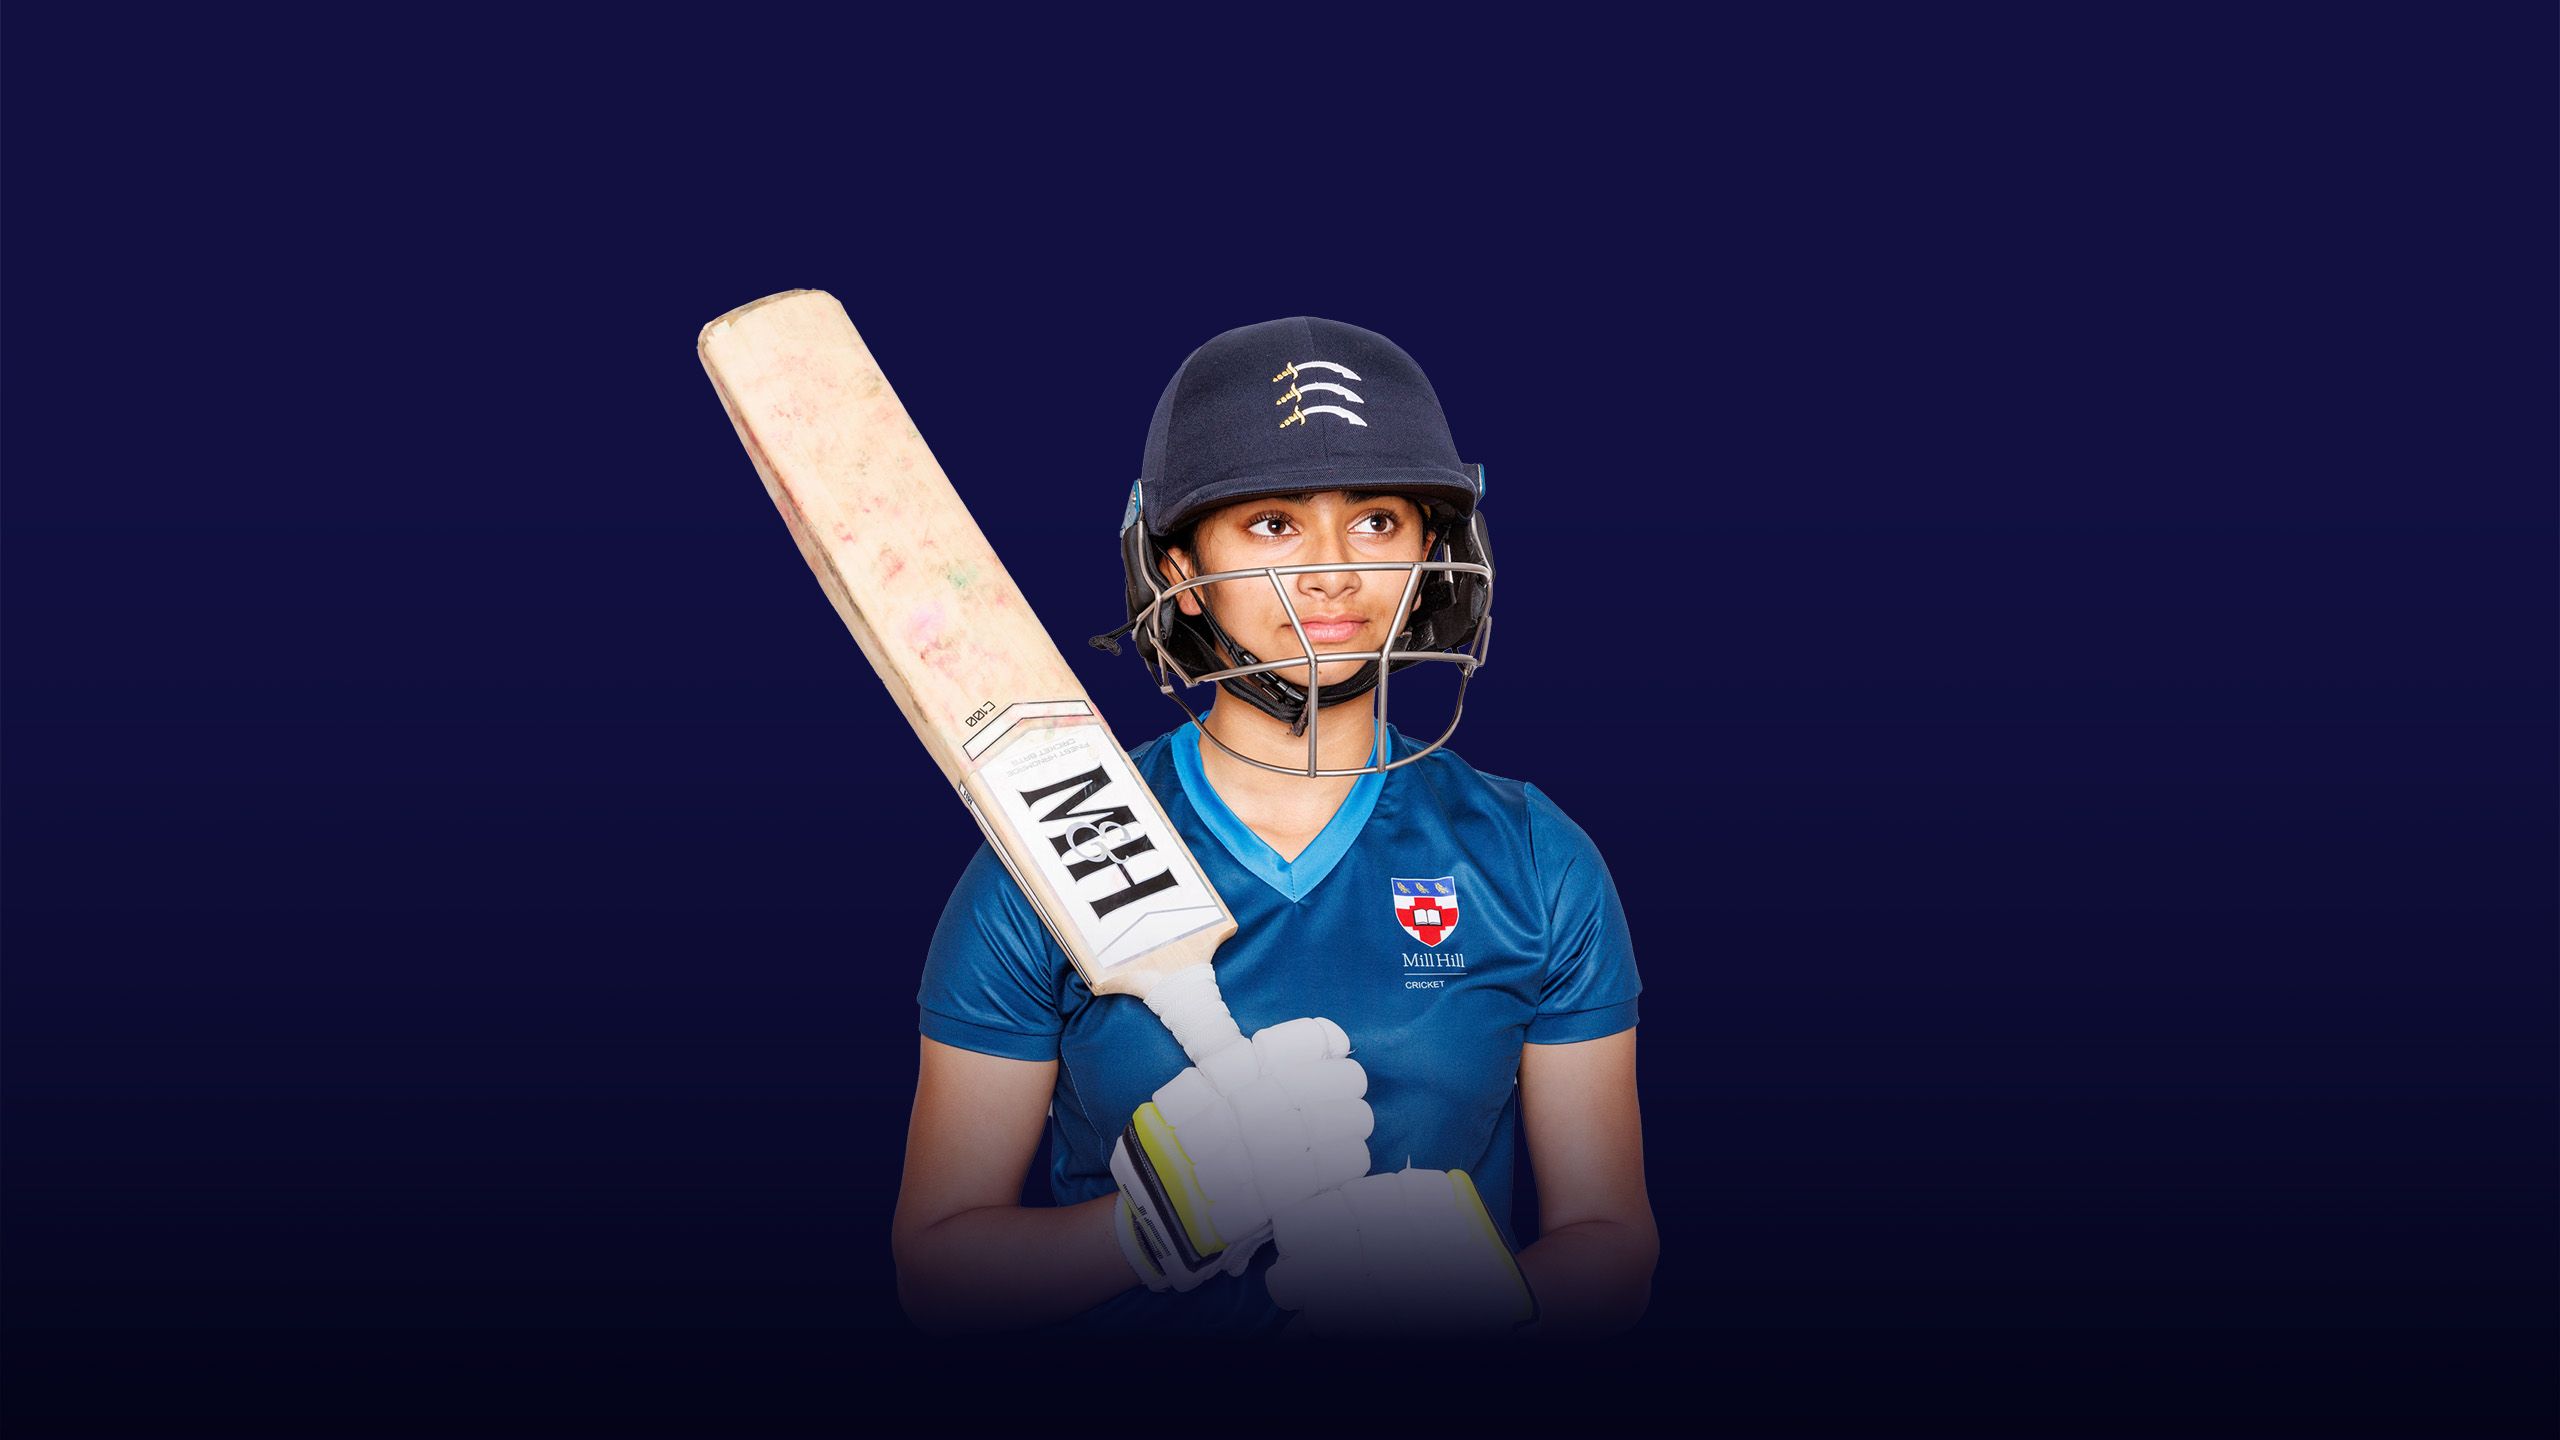 A girl against a dark background holding a cricket bat and wearing a cricket helmet with an overlay of the text "instilling values" 